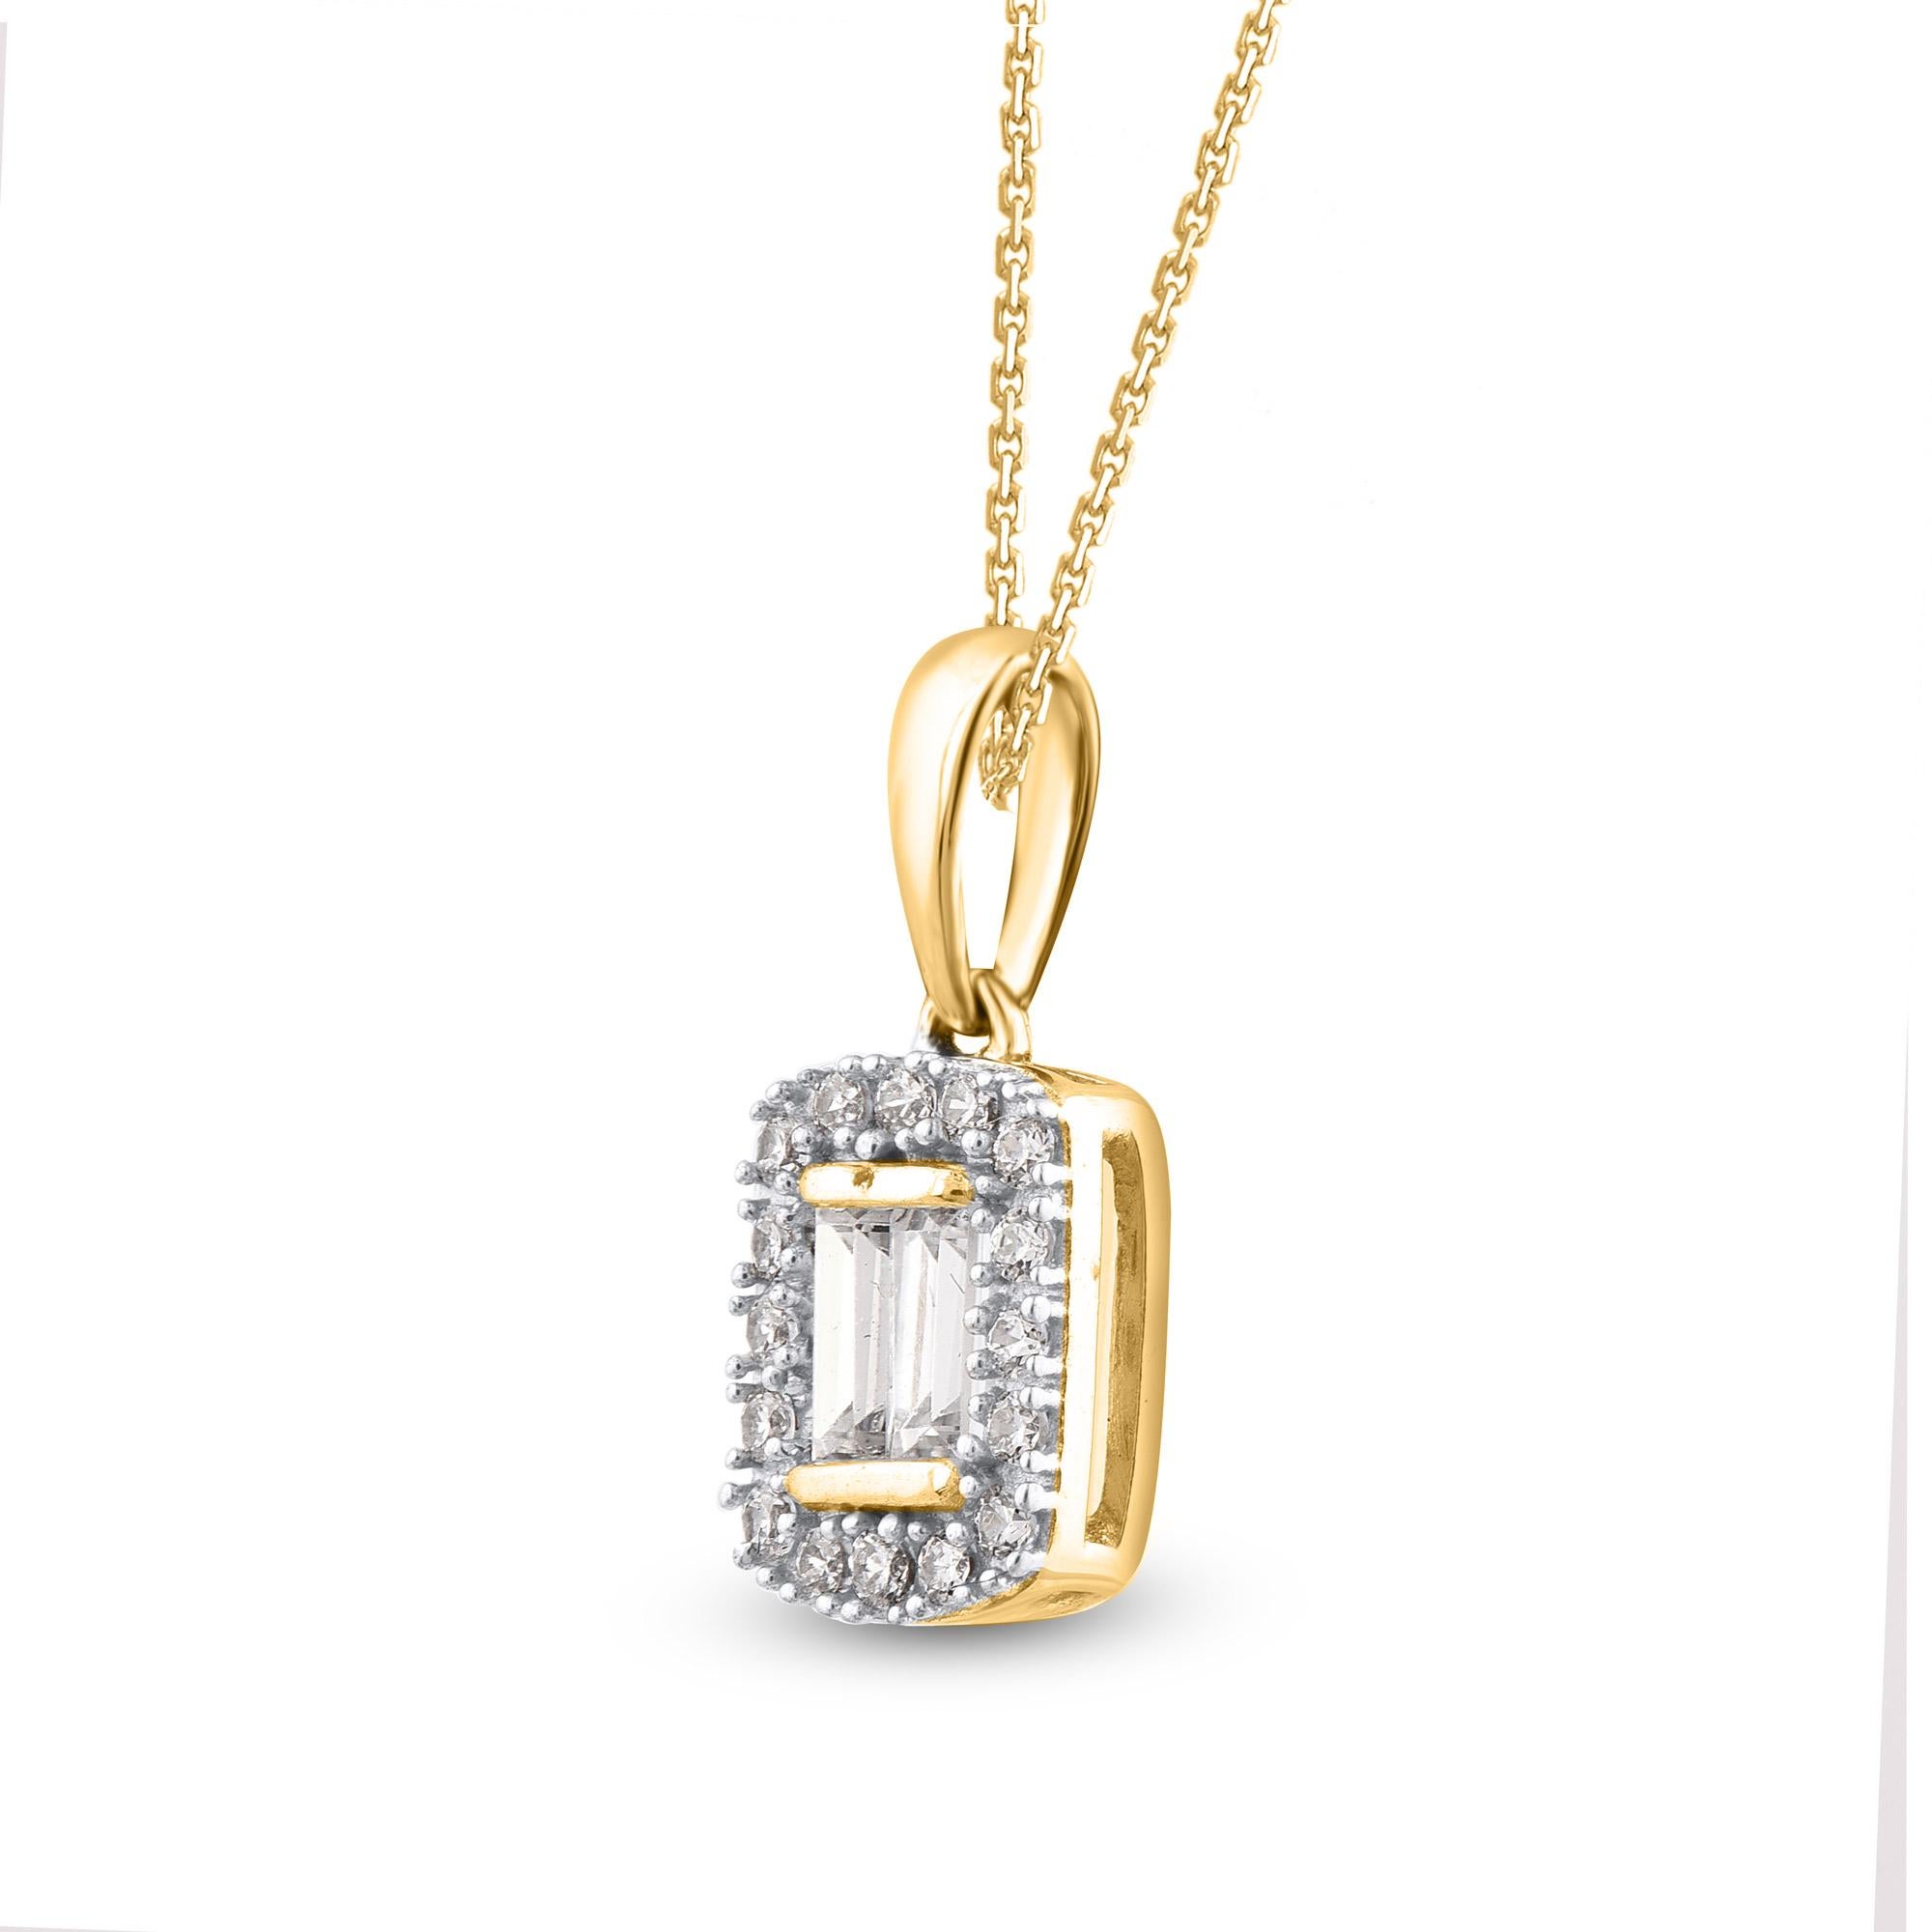 This beautiful cushion pendant necklace is studded with 19 brilliant cut and baguette cut natural diamonds in prong and channel setting. The total diamond weight of these pendant is 0.20 carats. All the diamonds are H-I color, I-2 clarity. This